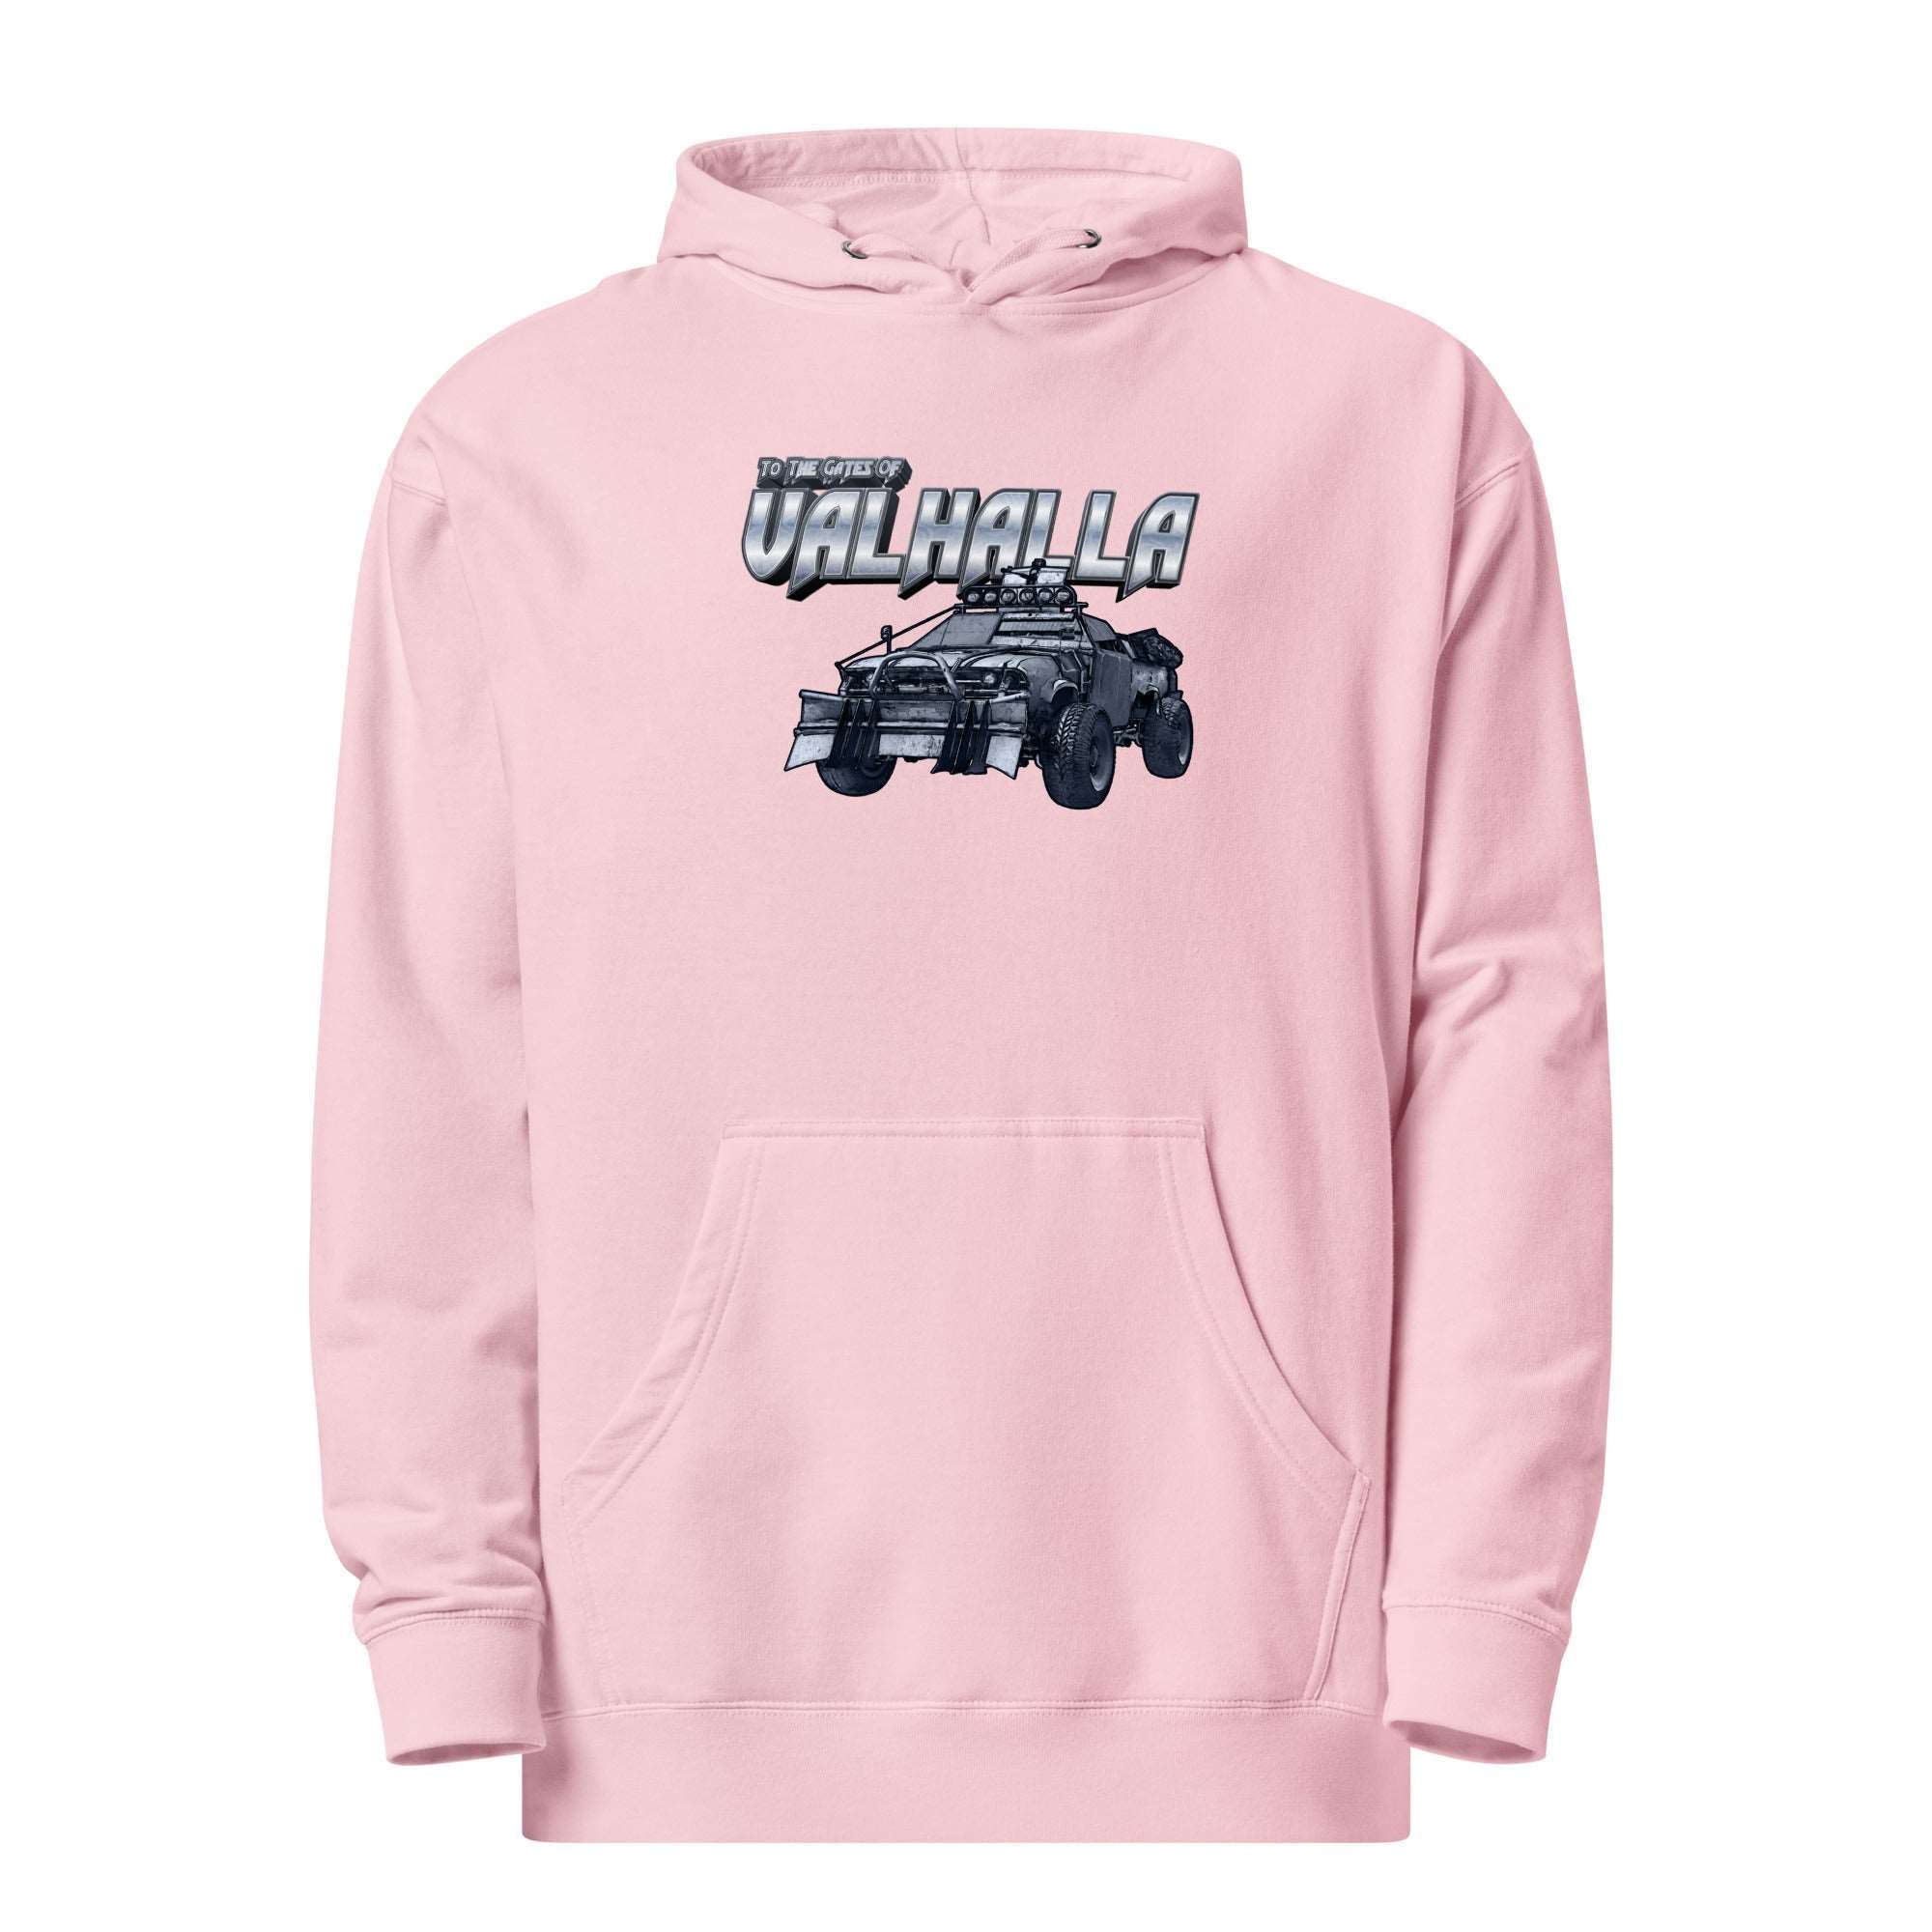 a white hoodie with an image of a jeep on it